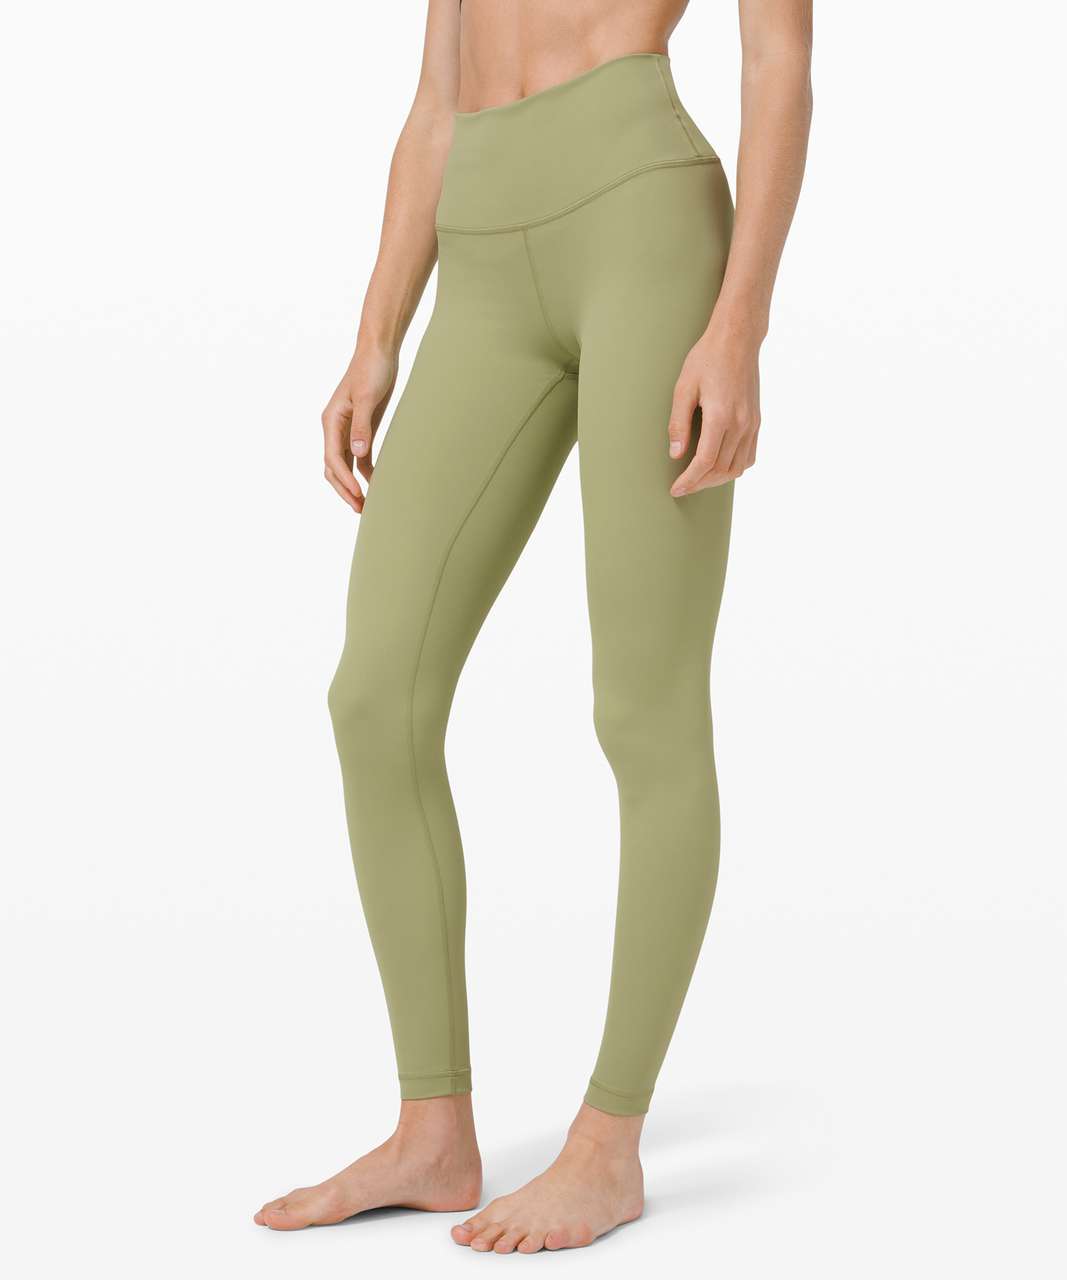 Lululemon Wunder Under High-Rise Tight 28" *Full-On Luxtreme - Vista Green (First Release)